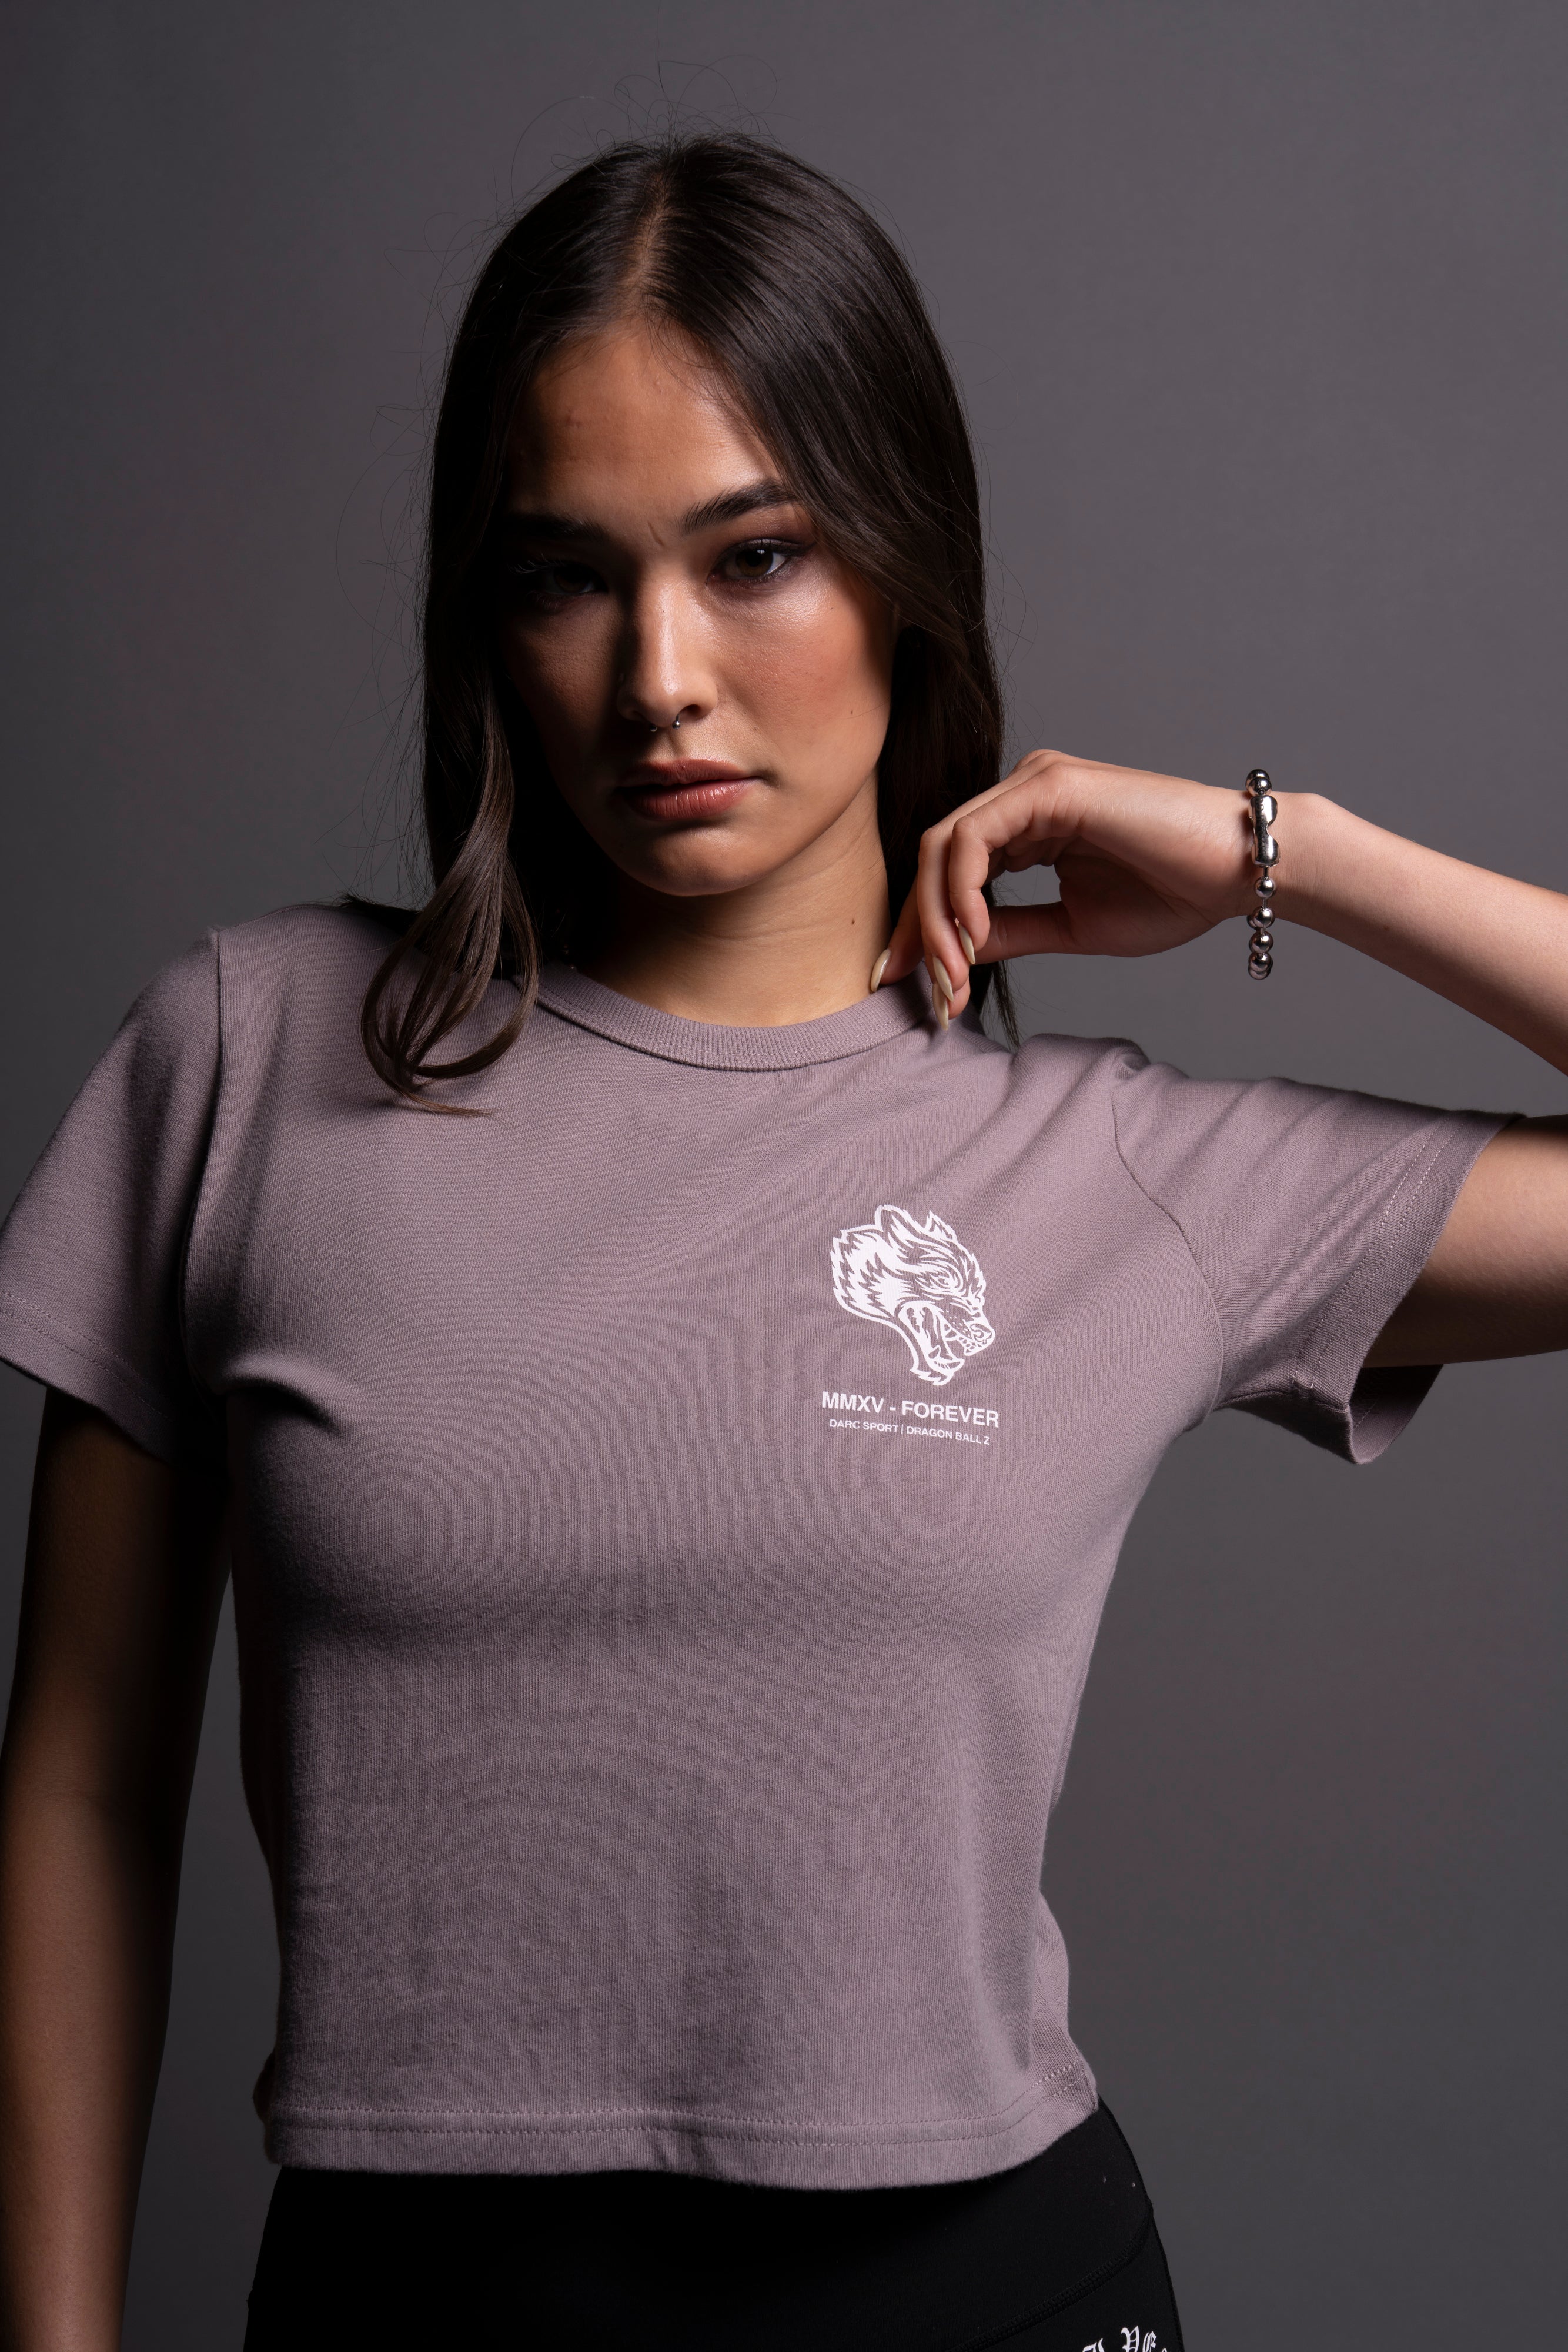 Shenron "Timeless" Tee in Pale Gray